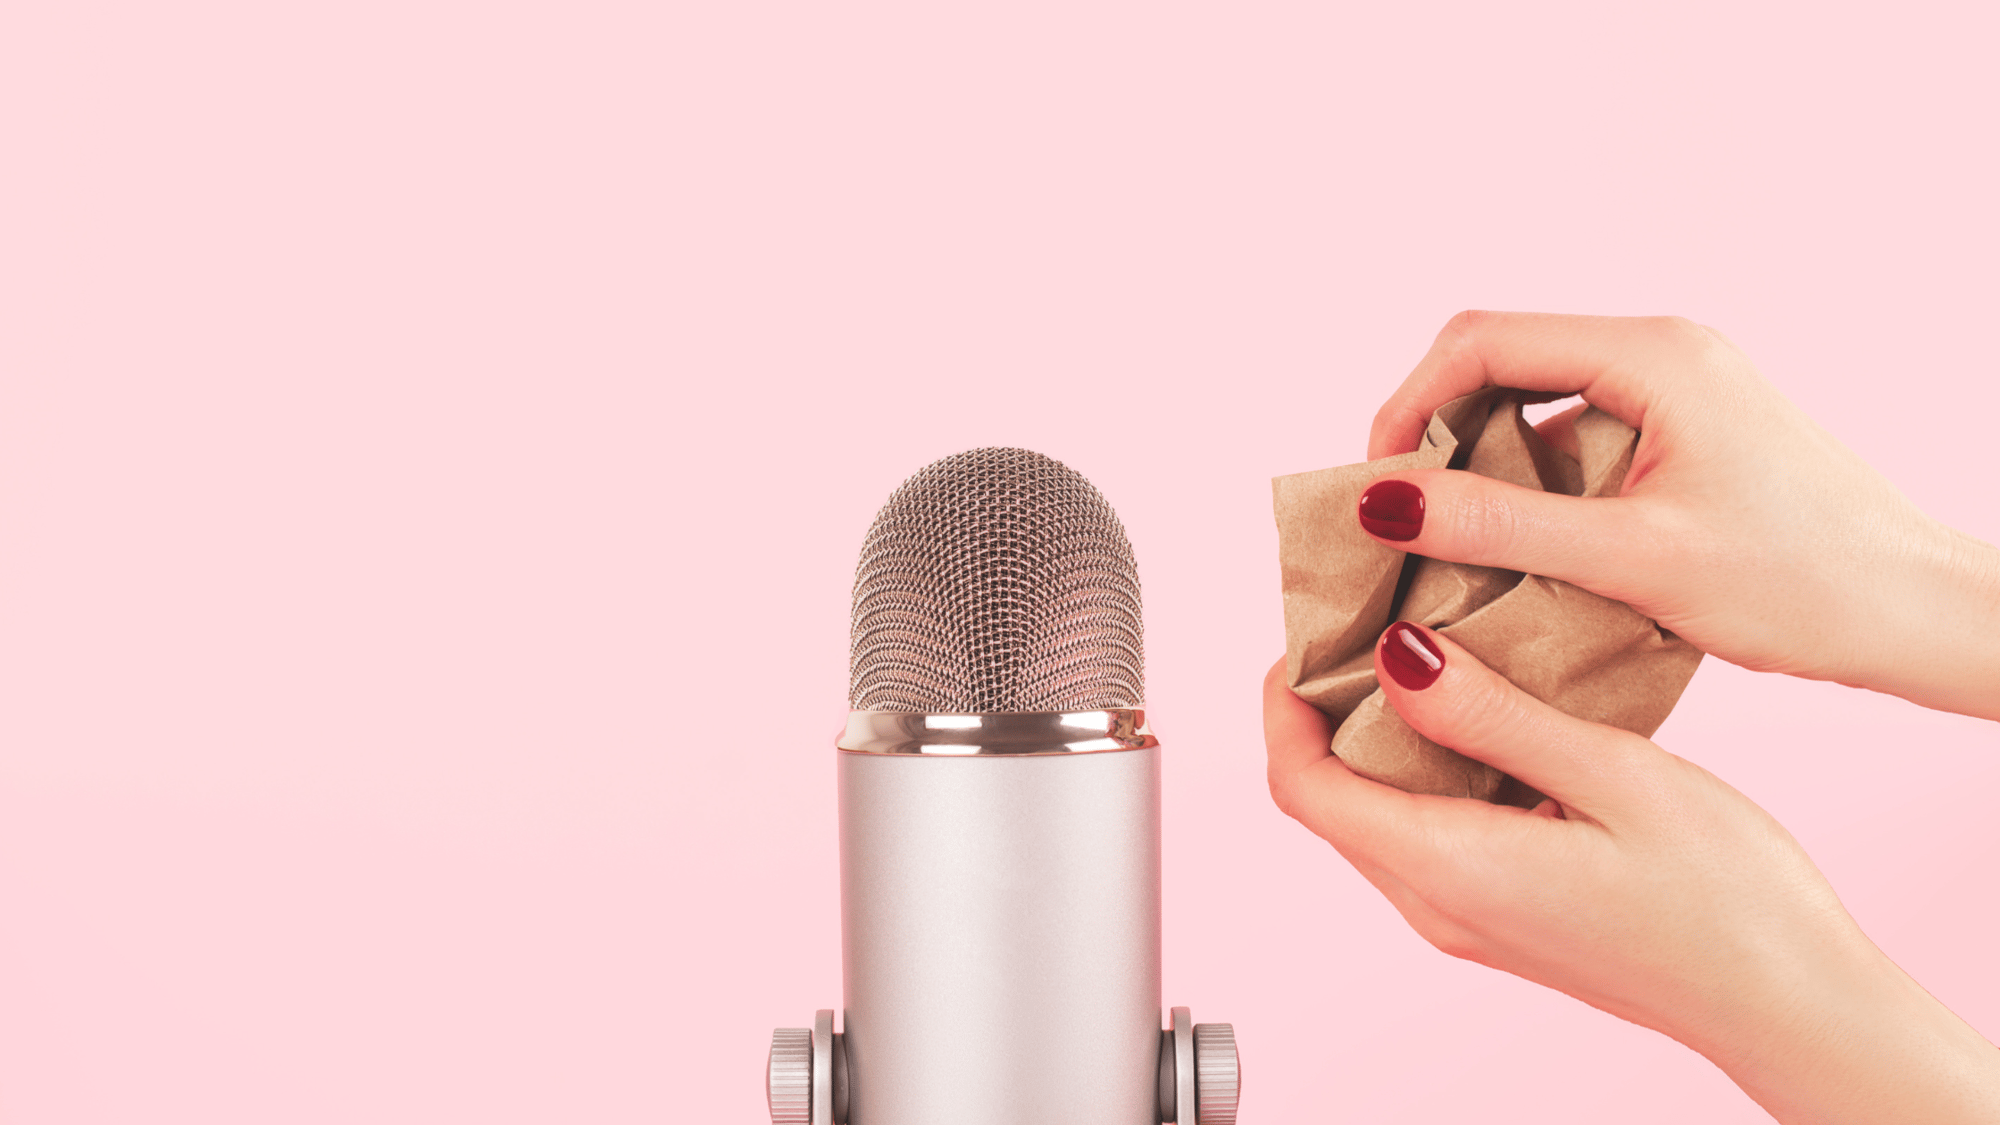 Manicured hands scrunching up some paper next to a silver microphone with a pink background